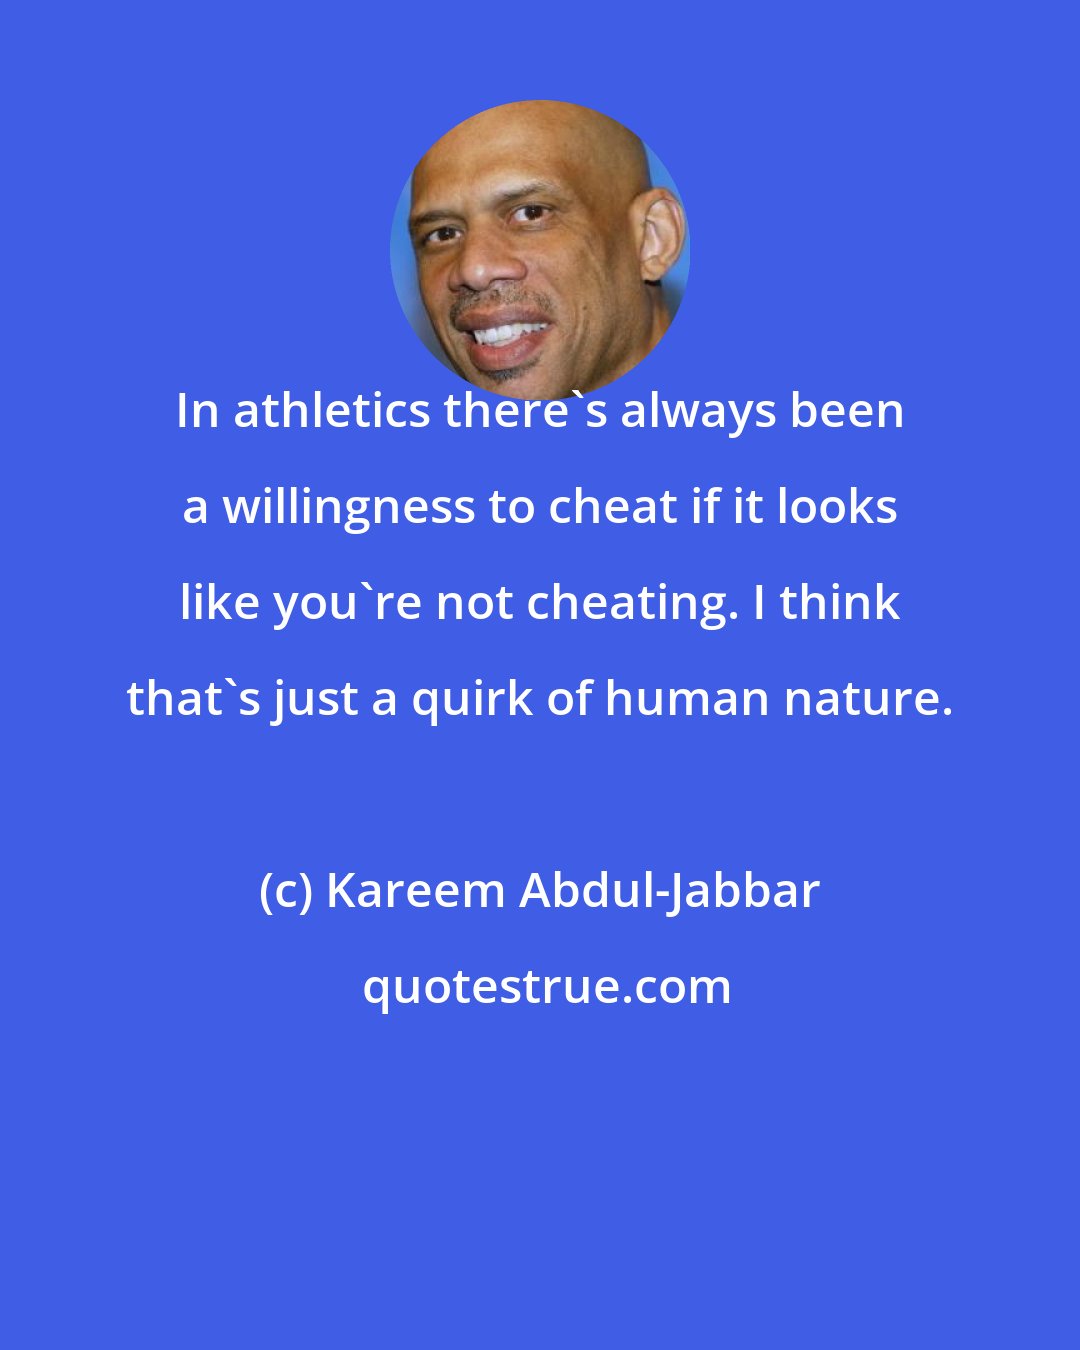 Kareem Abdul-Jabbar: In athletics there's always been a willingness to cheat if it looks like you're not cheating. I think that's just a quirk of human nature.